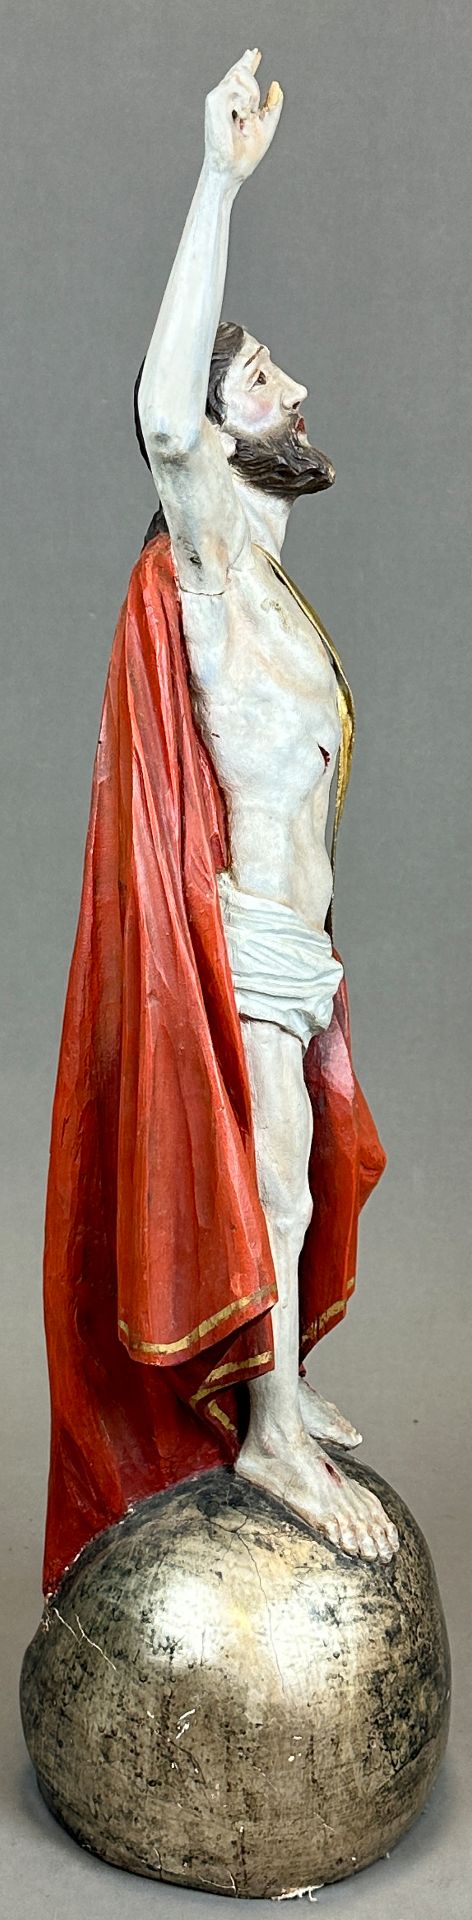 Wooden figure. Jesus Christ risen from the dead. 19th century. South Germany. - Image 4 of 11